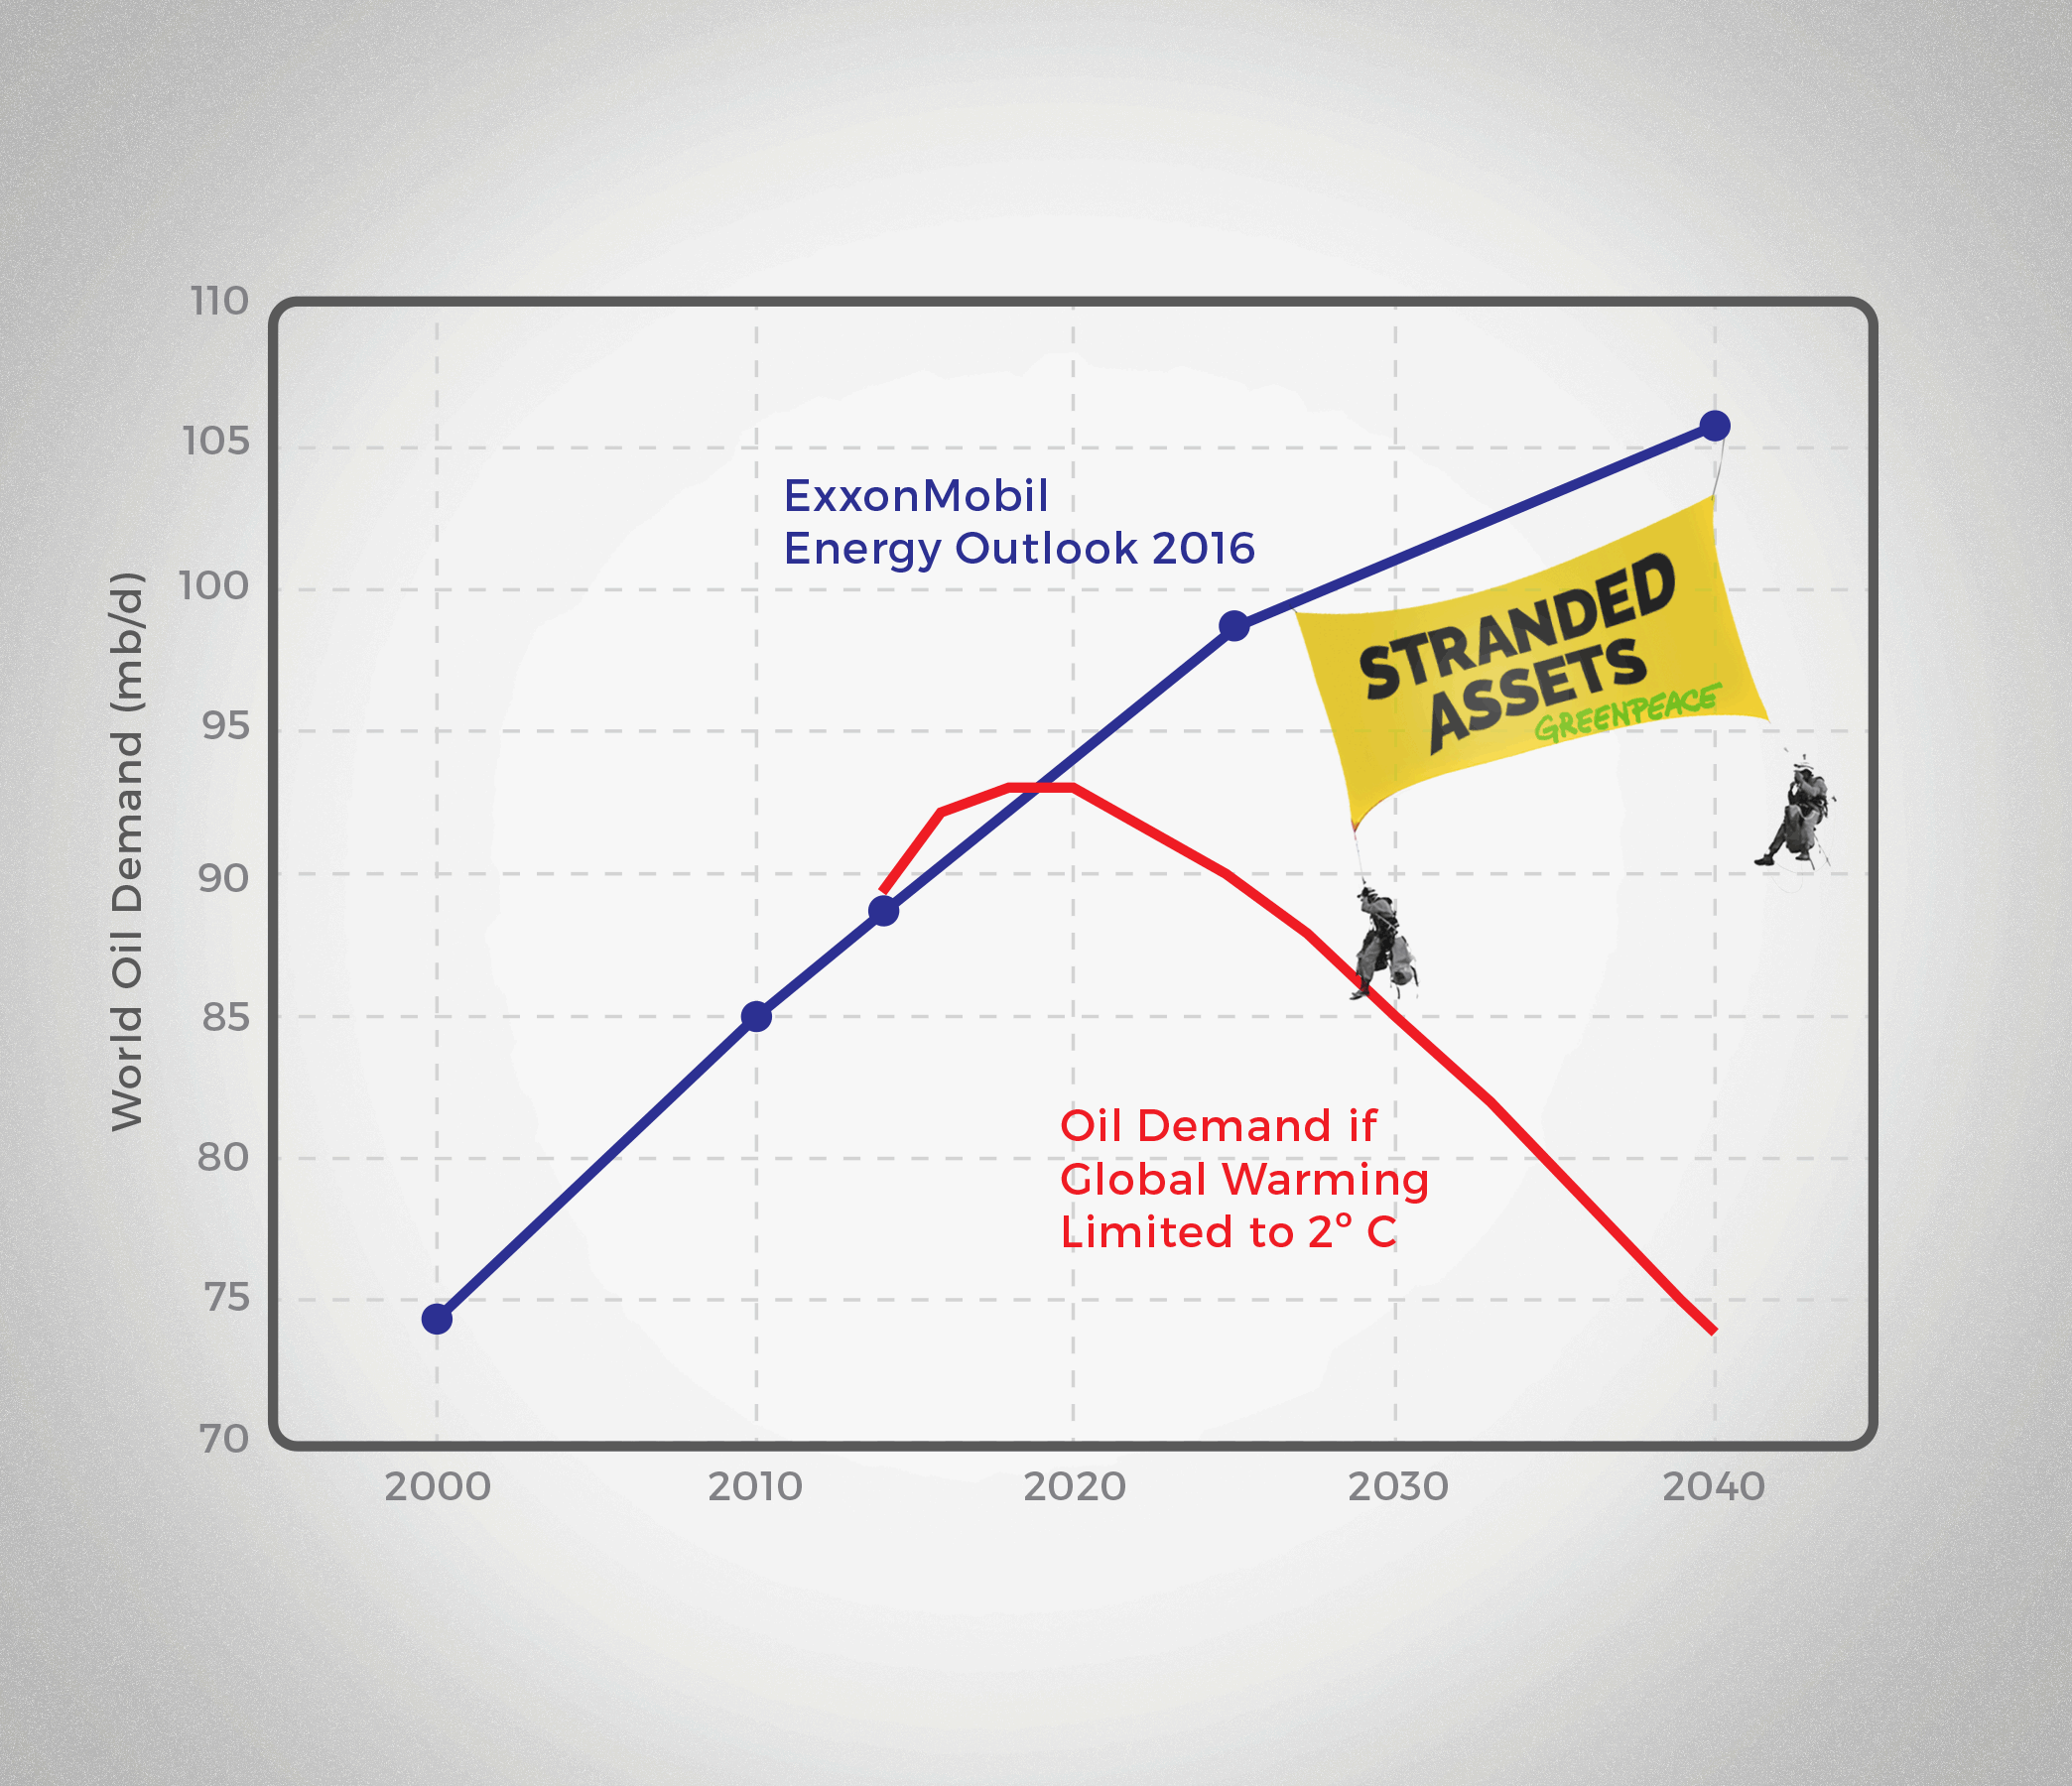 Chart comparing the IEA’s 450 scenario (red line) with ExxonMobil’s estimate (blue line) for world oil demand from 2014 to 2040 (in units of millions of barrels of oil per day). The IEA 450 scenario gives a 50% chance of limiting global warming to 2 degrees C. Data: IEA World Energy Outlook 2015 (Figure 3.1), ExxonMobil Energy Outlook 2016 (p. 72). Protesters courtesy of the climate justice movement.